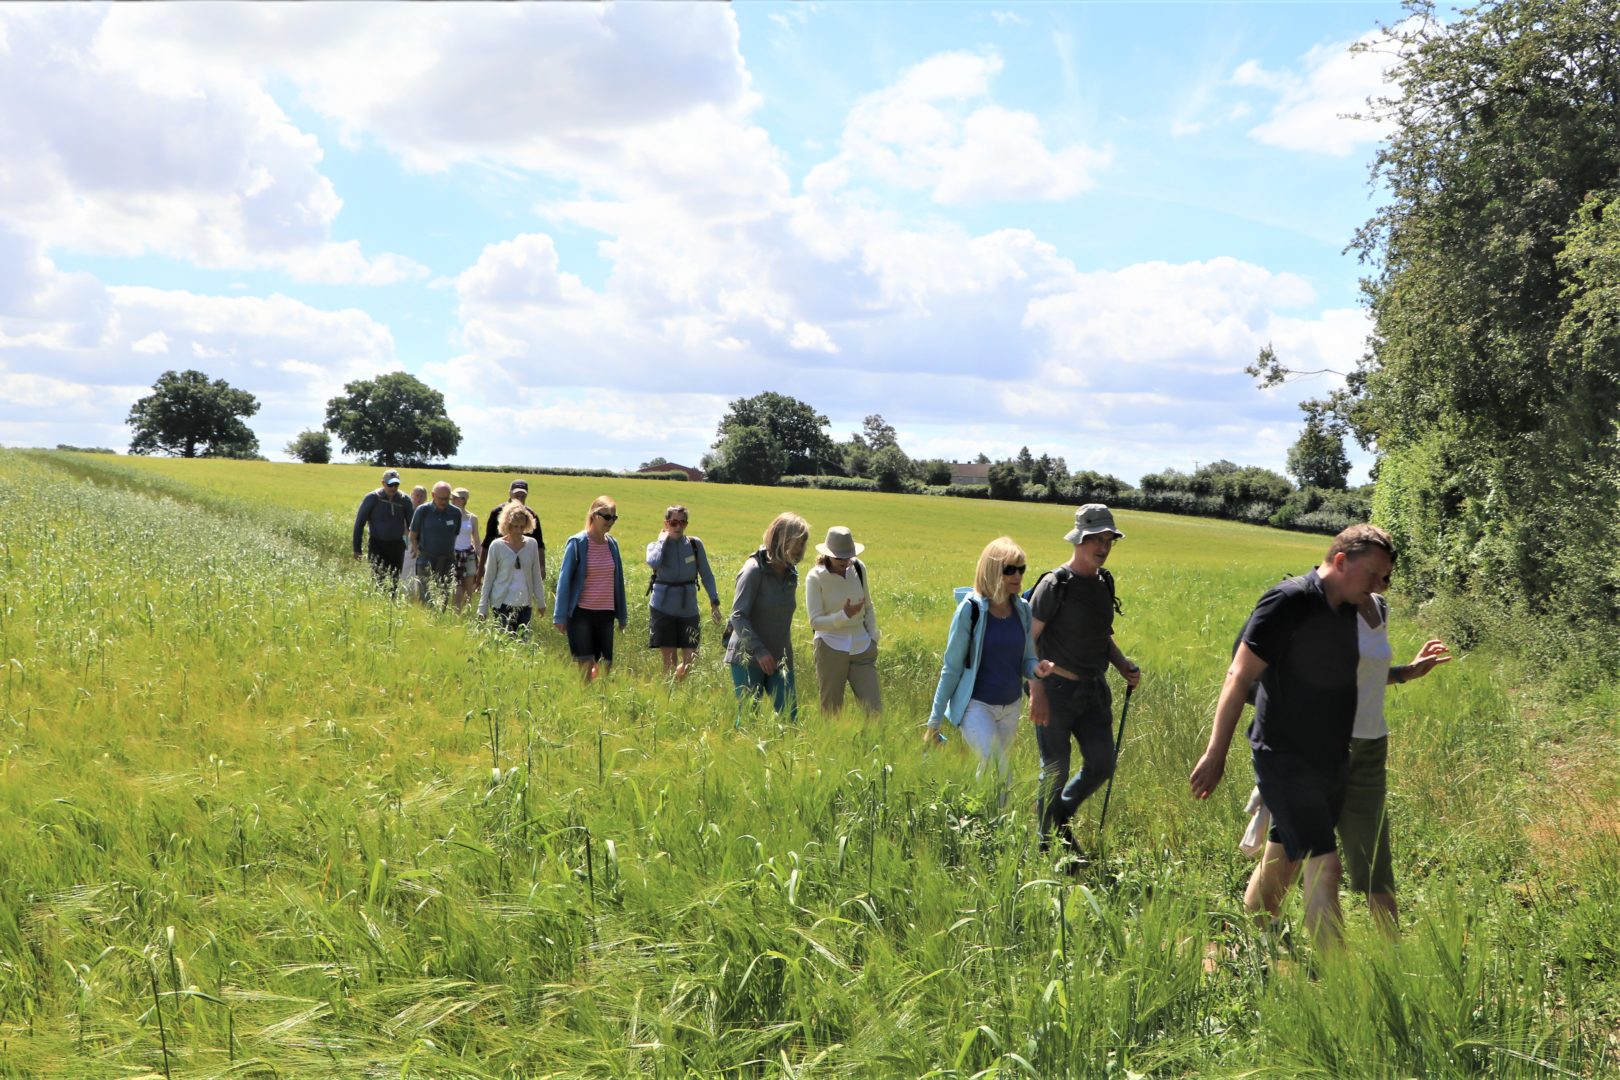 guided walks, a group of walkers on a footpath through a field of wheat, sunshine and blue sky overhead